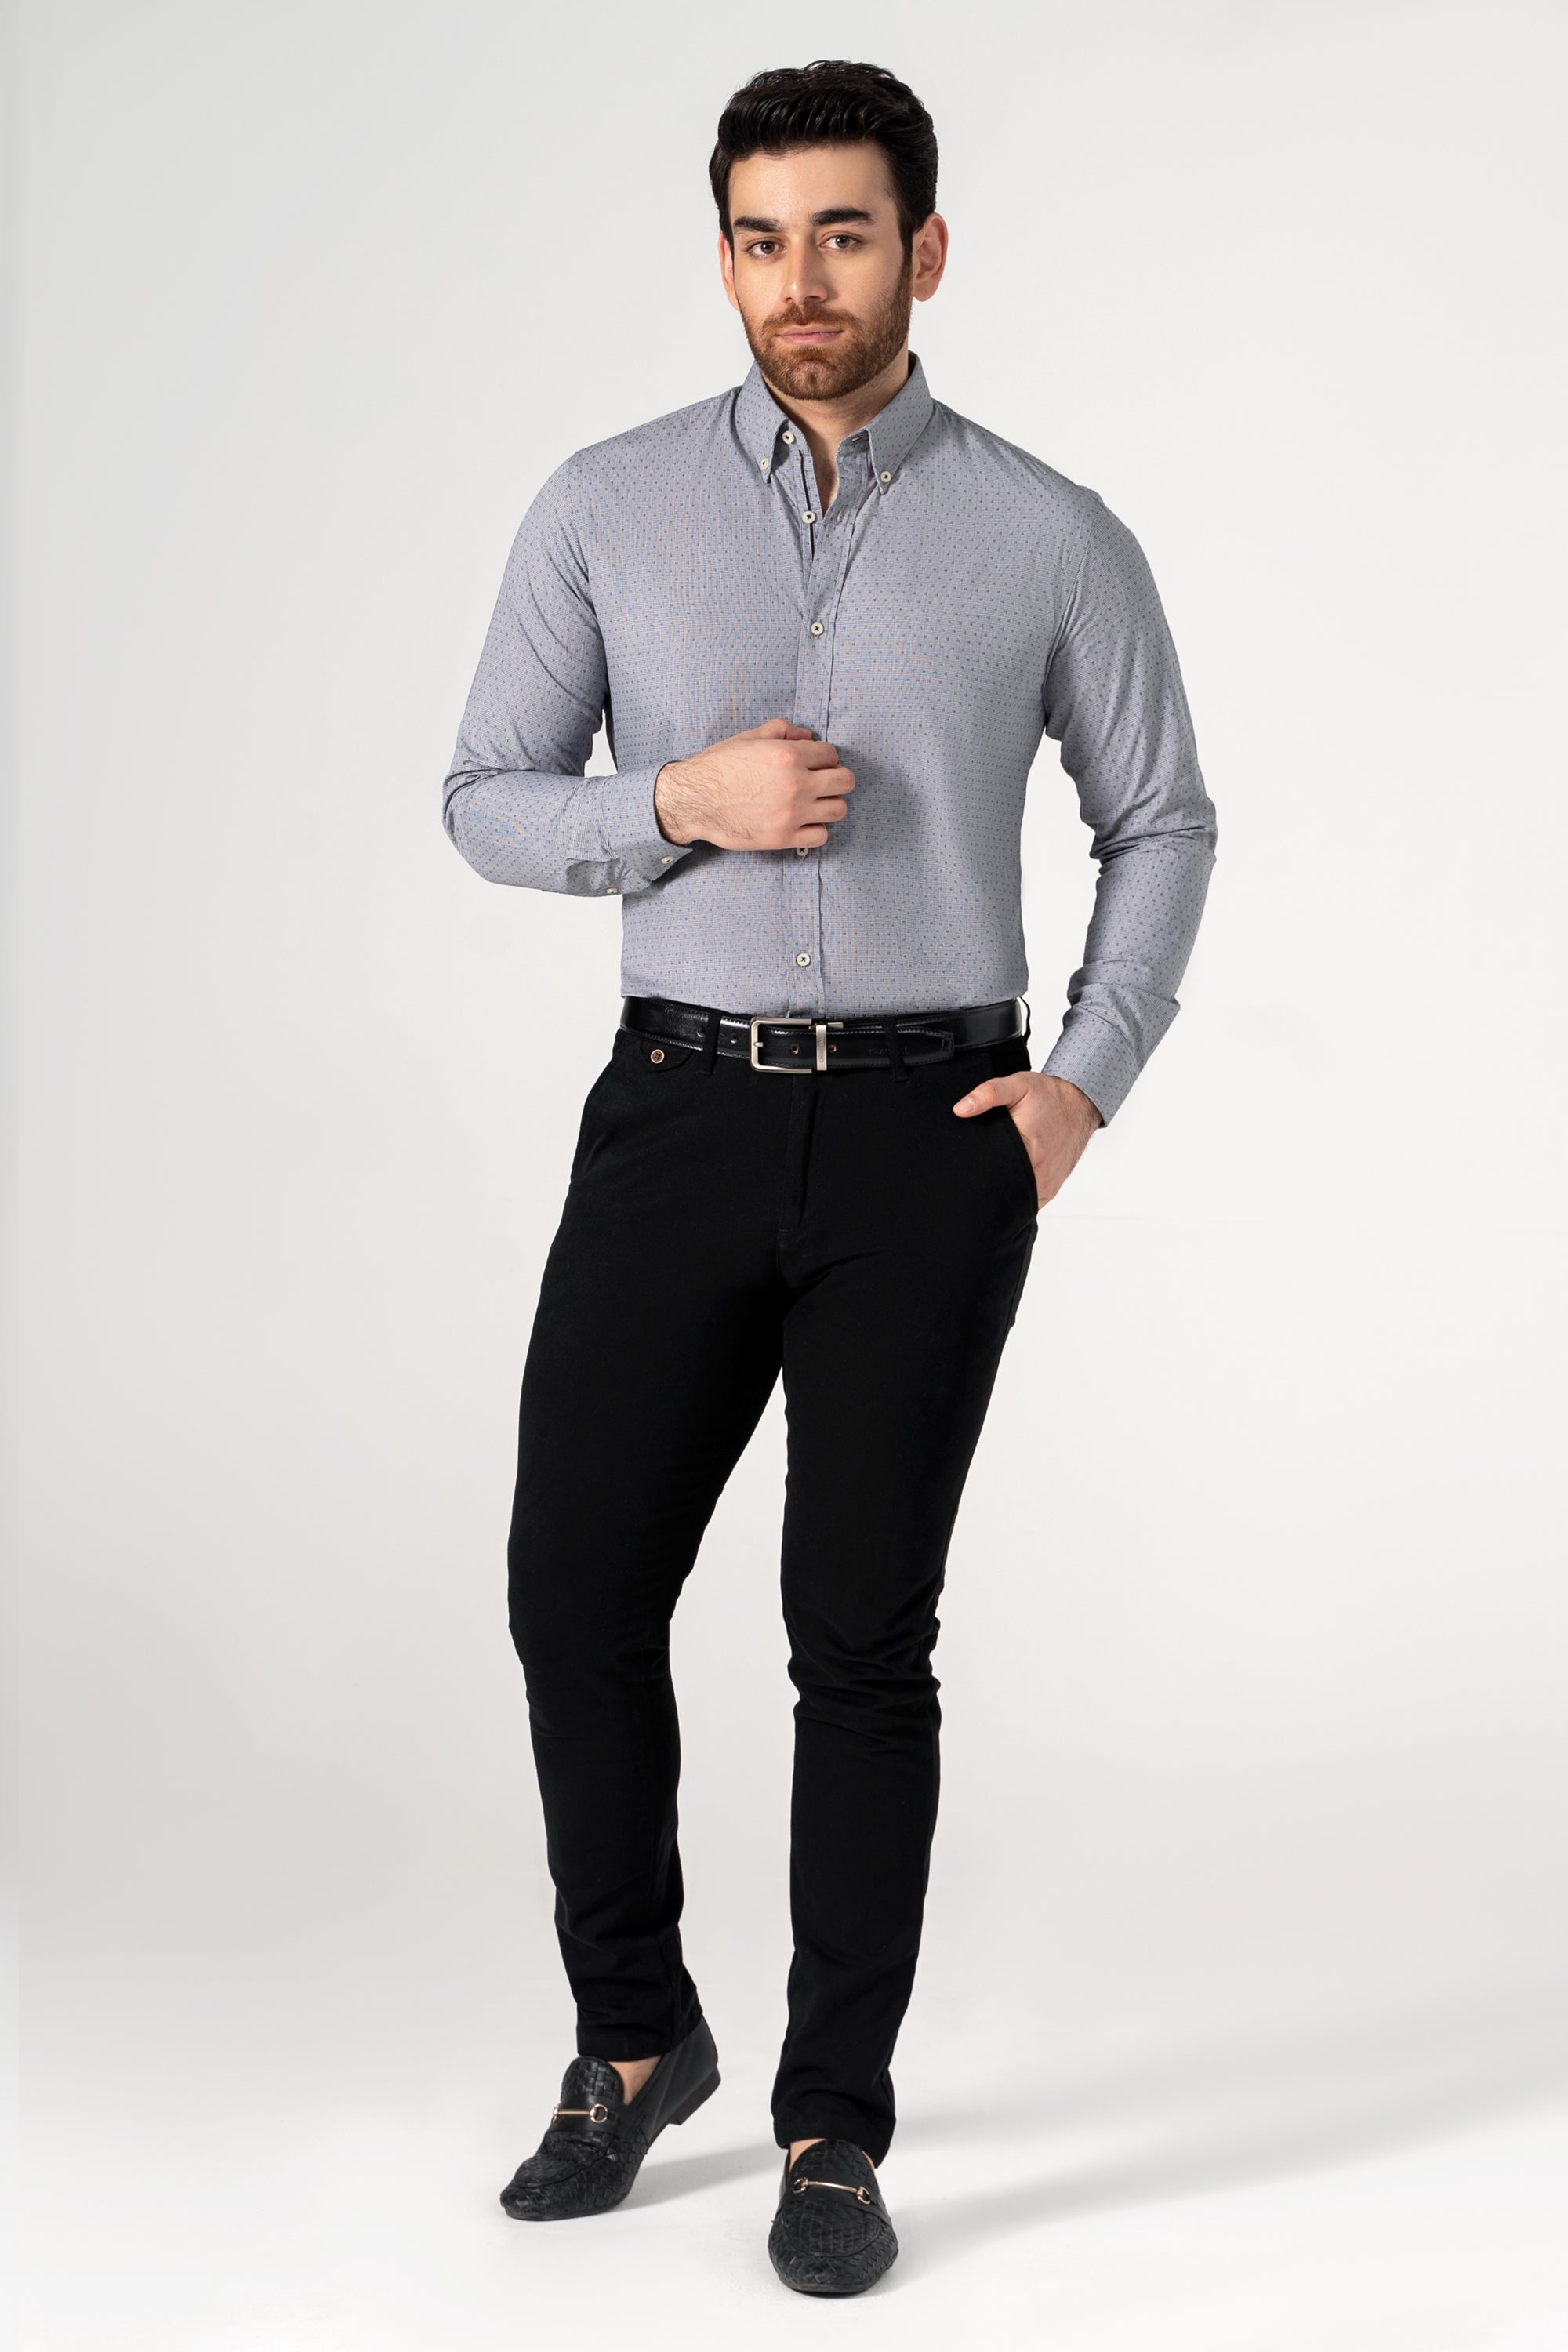 The Perfect Outfit: Black Shirt Combination Pants Ideas